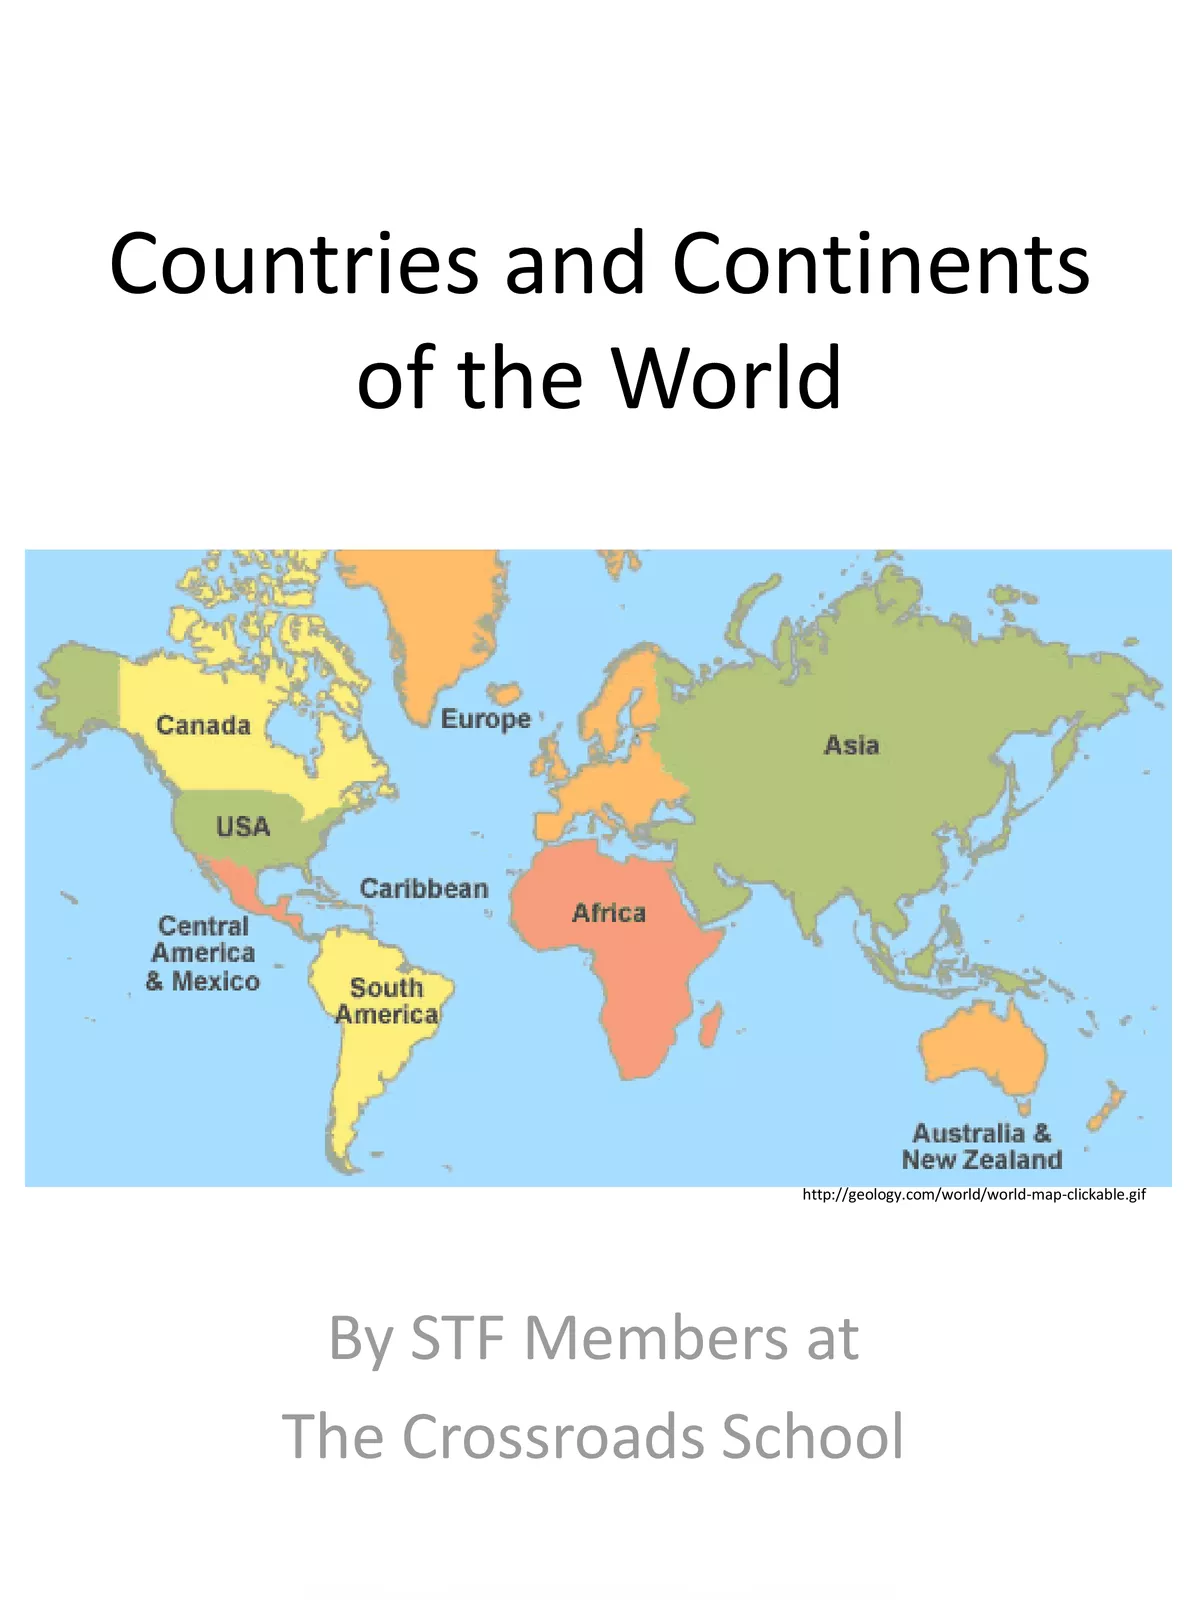 List of Continents and their Countries with Capitals